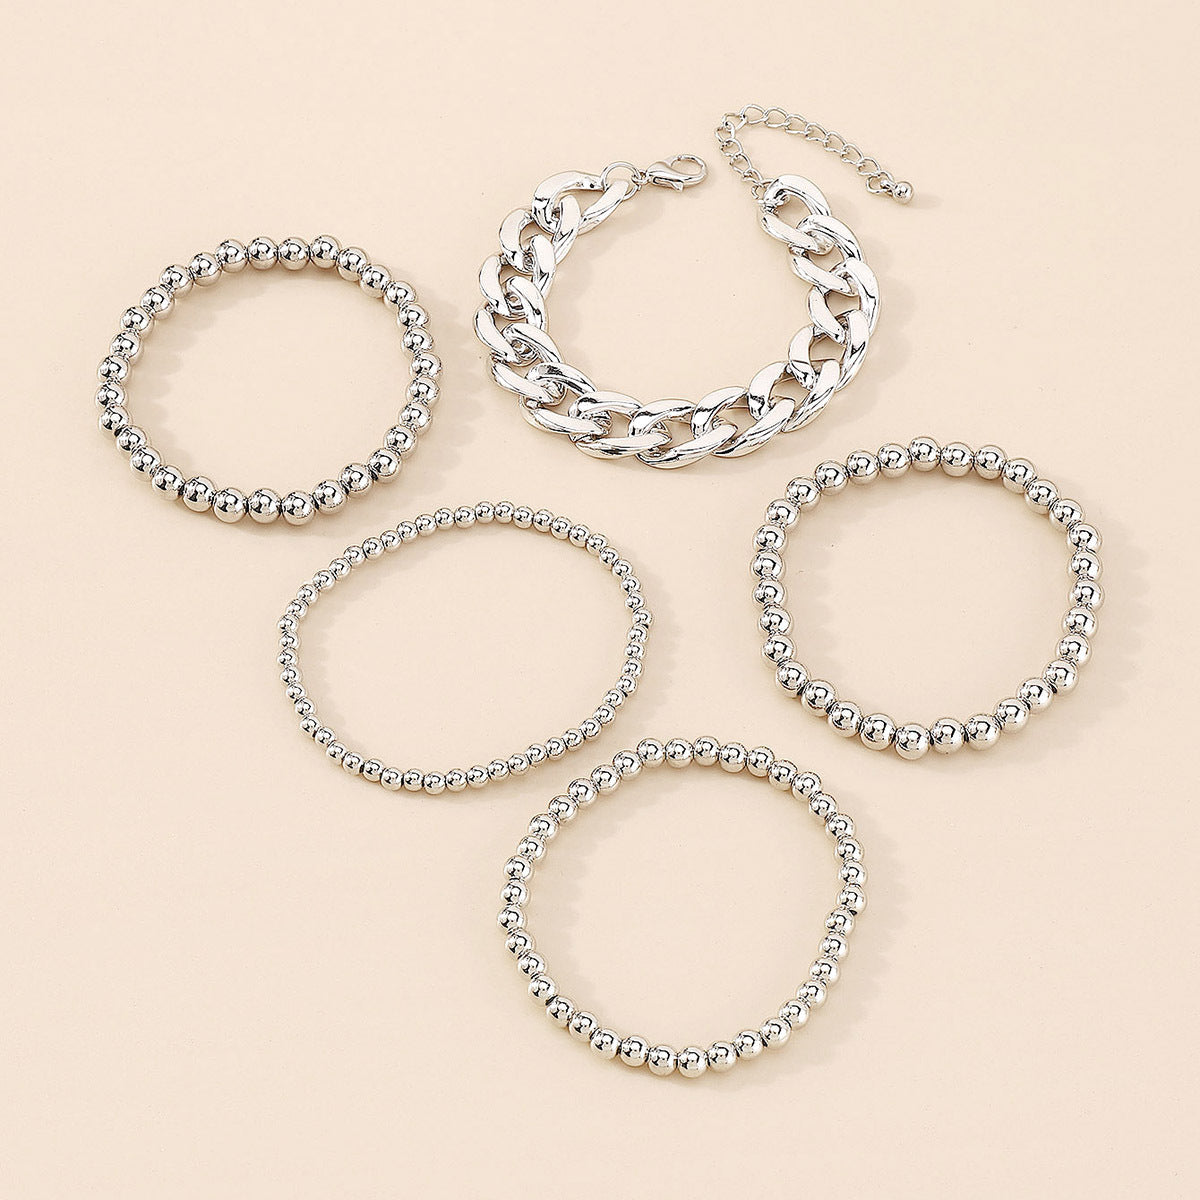 Silver-Plated Bead Stretch & Curb Chain Bracelet Set